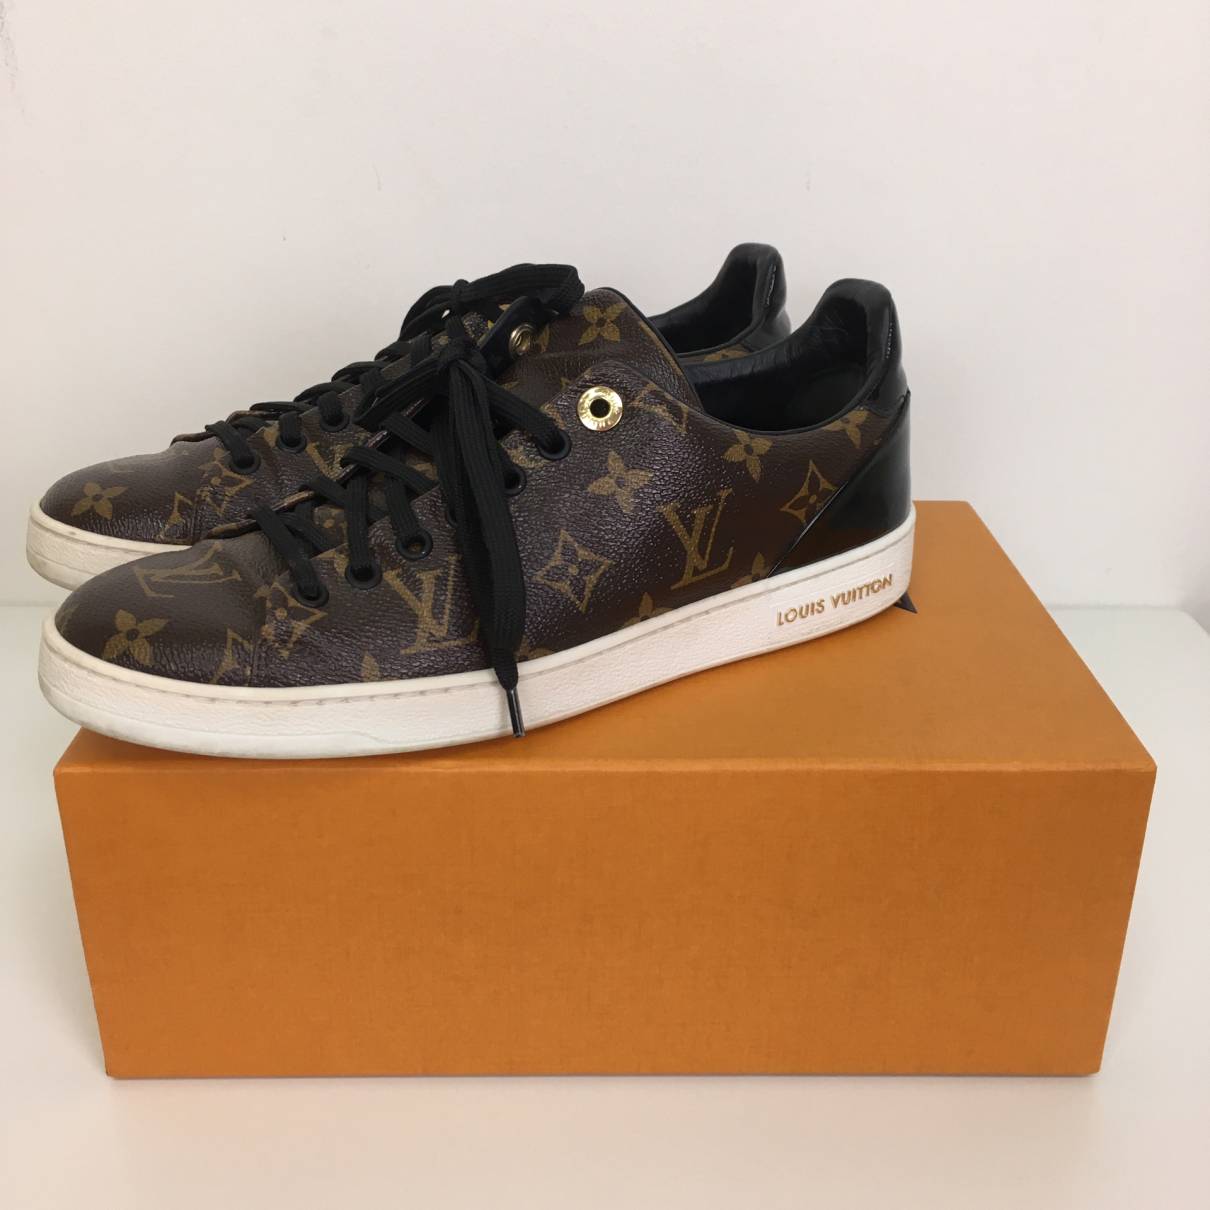 Louis Vuitton - Authenticated FRONTROW Trainer - Cloth Brown for Women, Very Good Condition